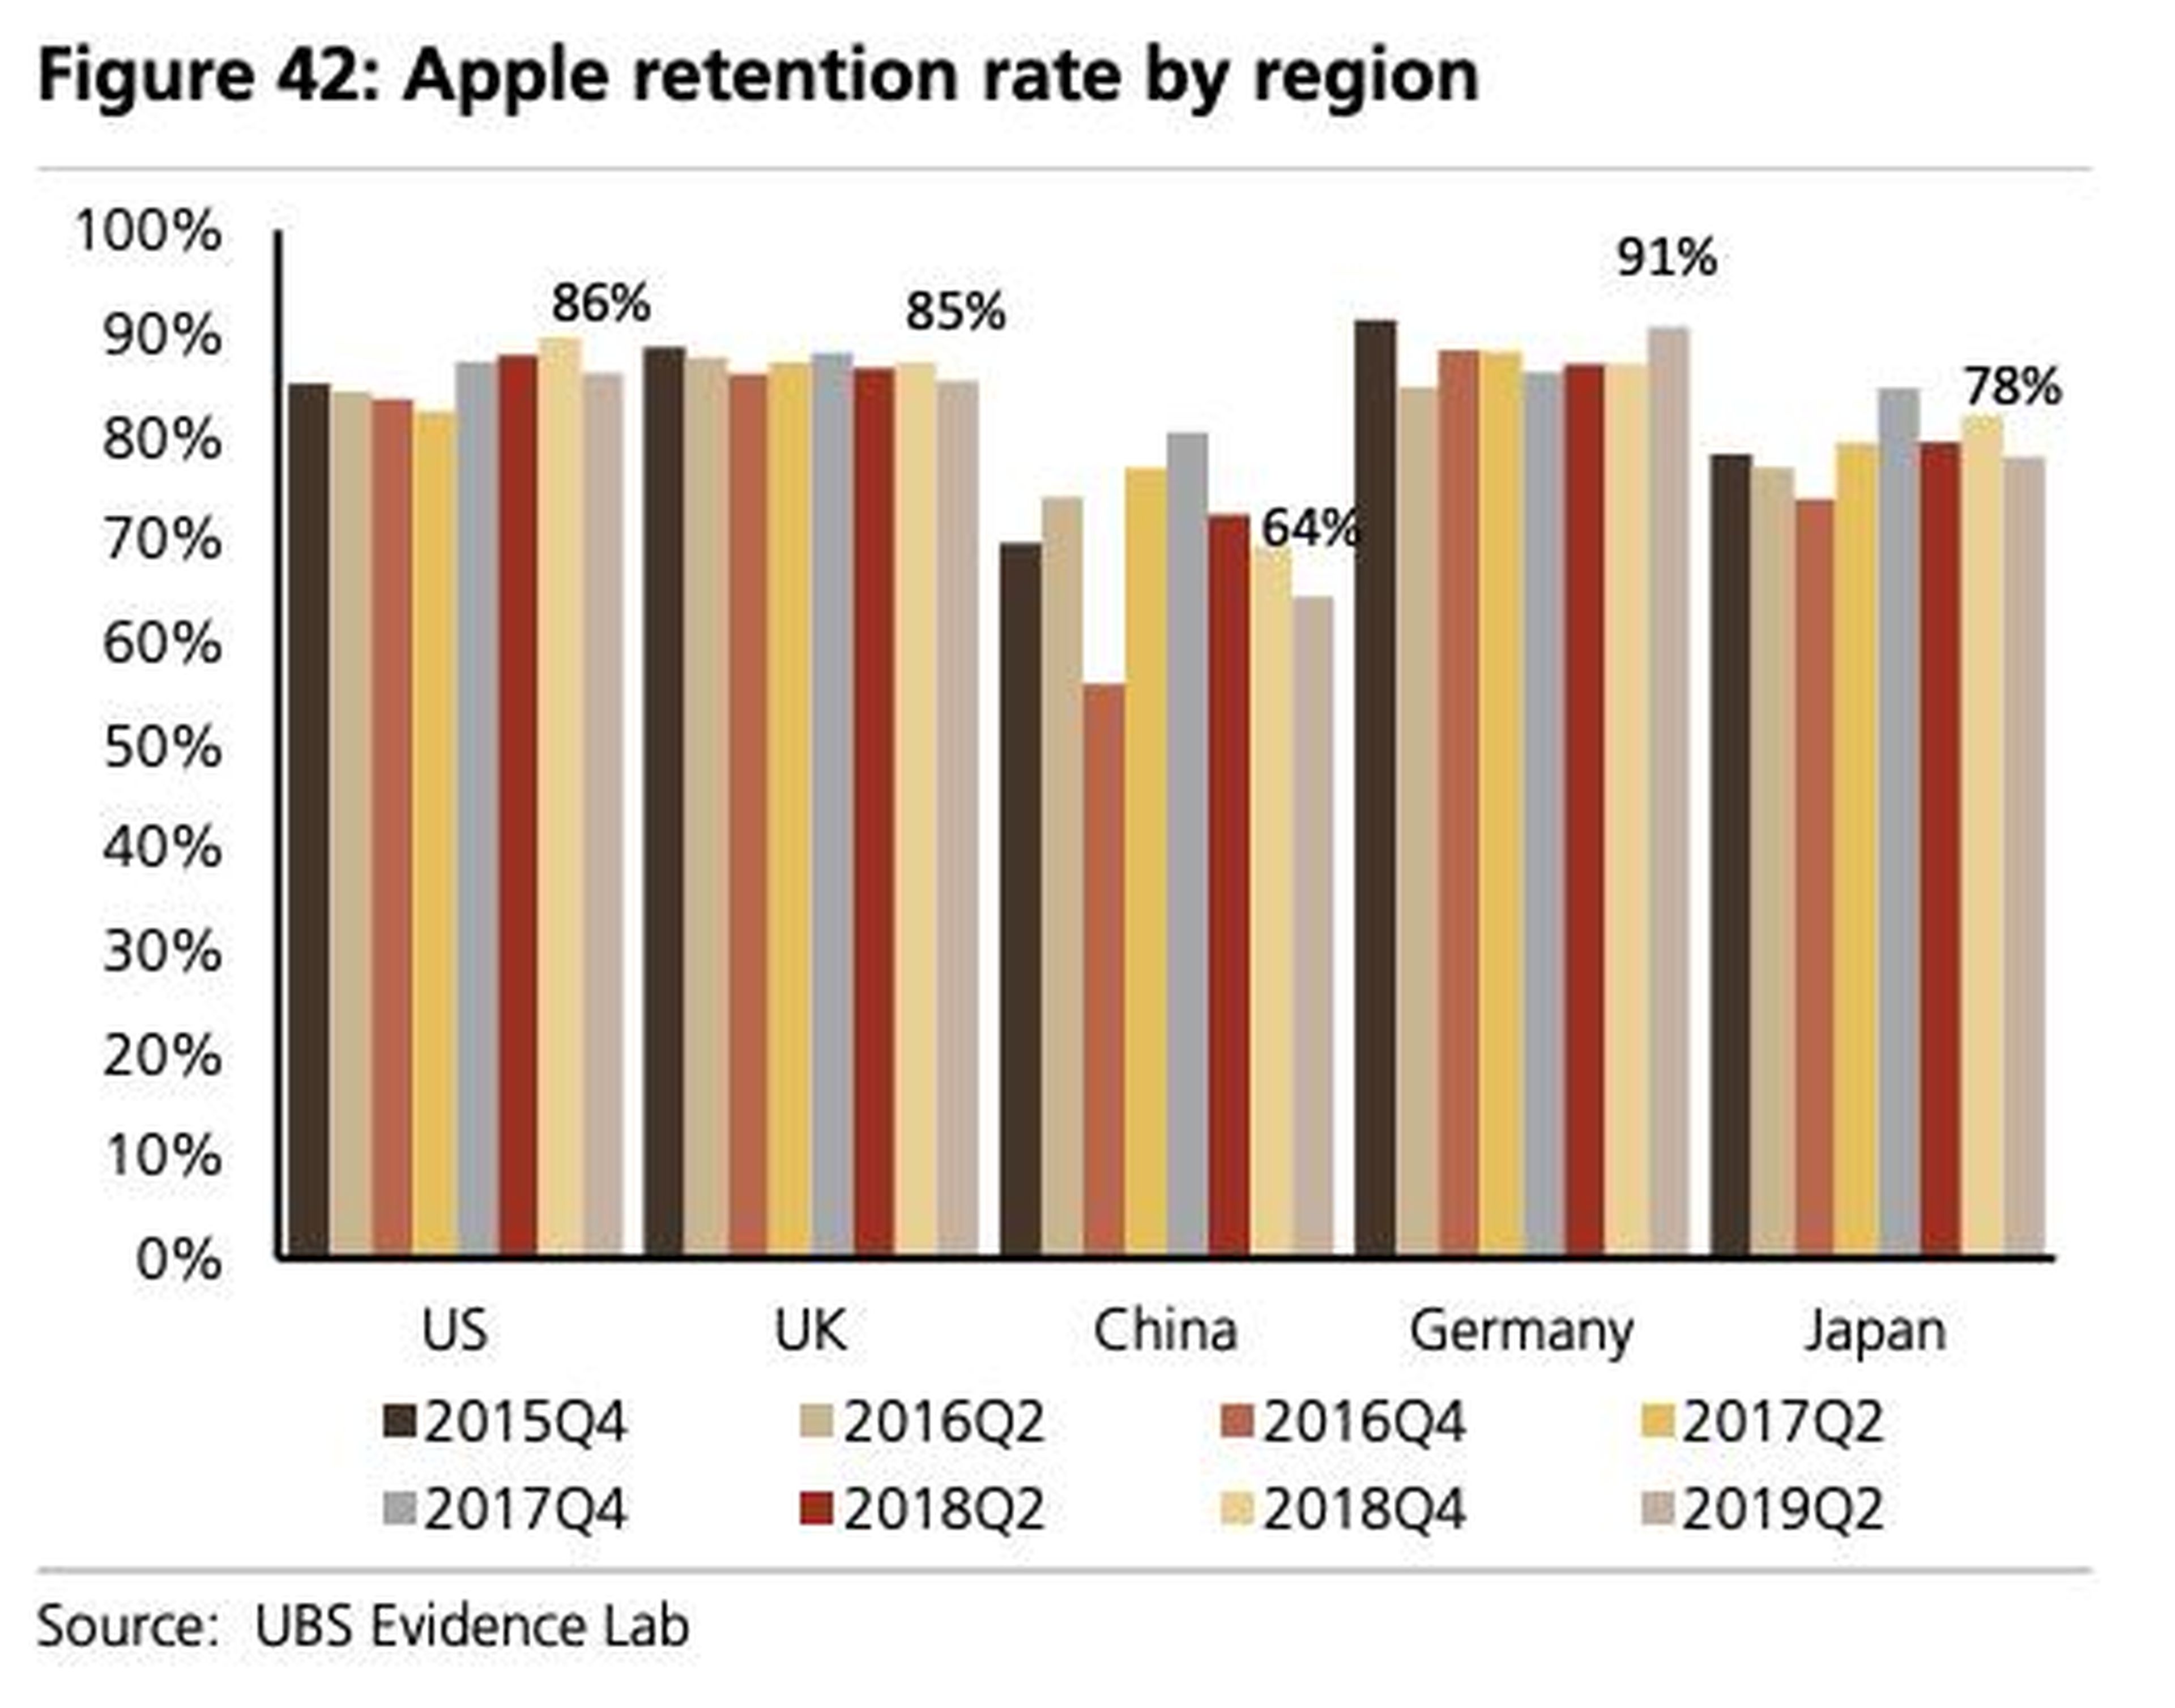 Apple's retention rate has dropped in China in particular.